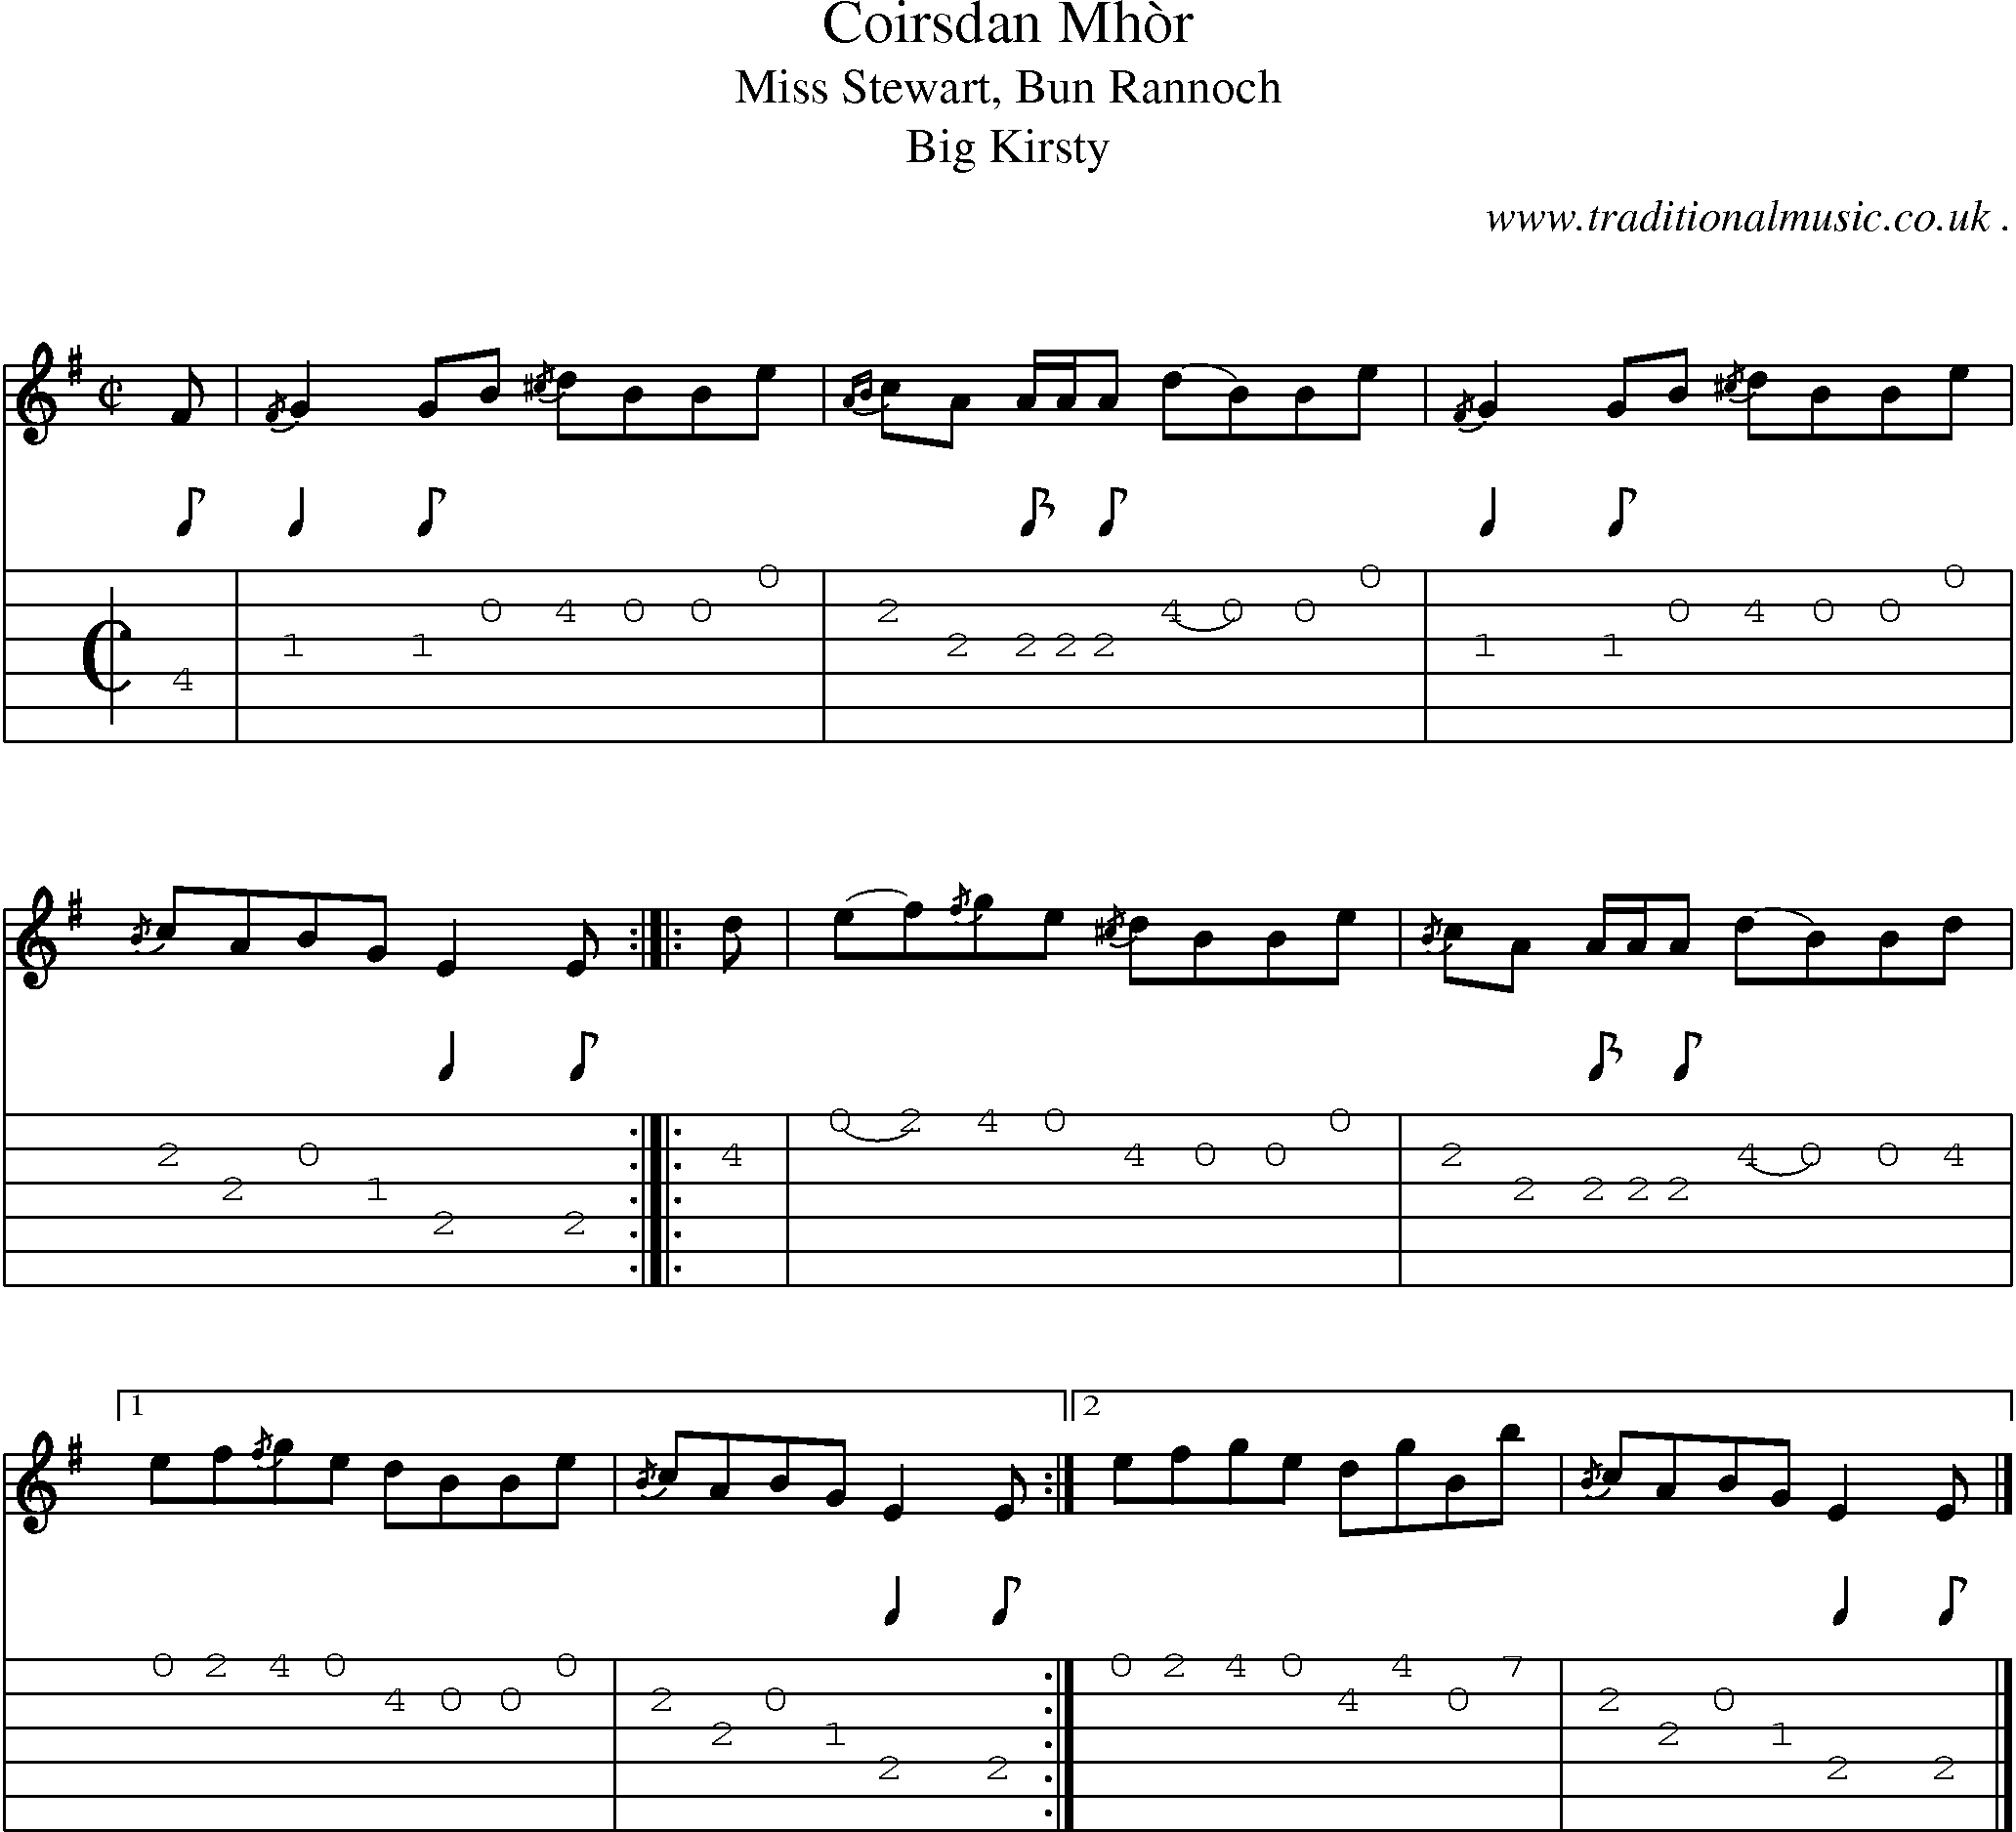 Sheet-music  score, Chords and Guitar Tabs for Coirsdan Mhor